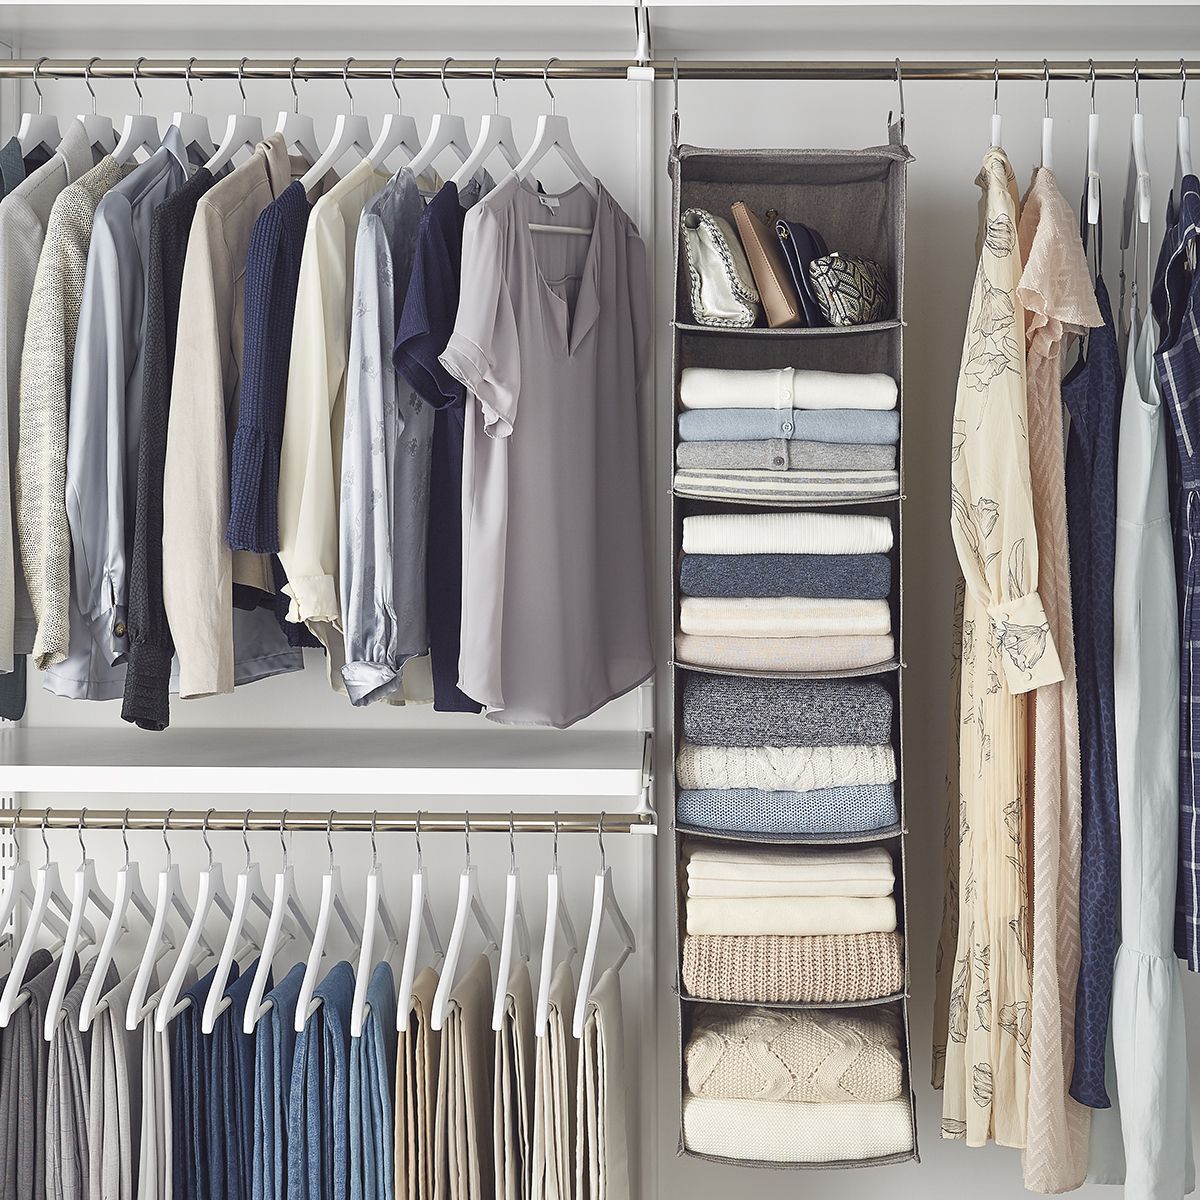 Hanging Wide Closet Organizers | The Container Store Regarding Hanging Closet Organizer Wardrobes (View 3 of 15)